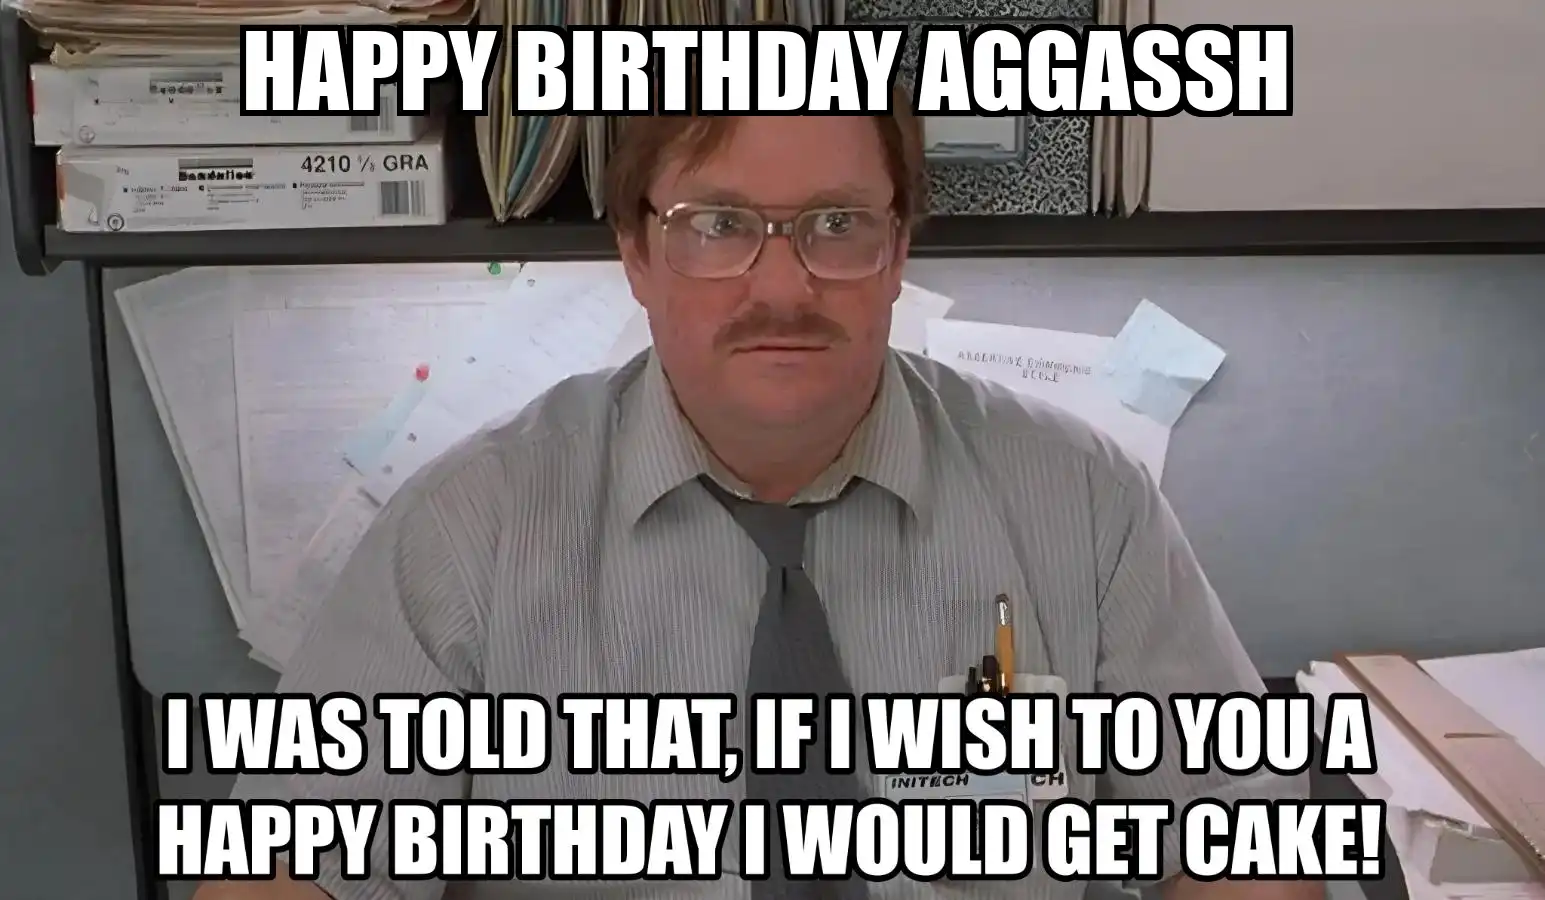 Happy Birthday Aggassh I Would Get A Cake Meme